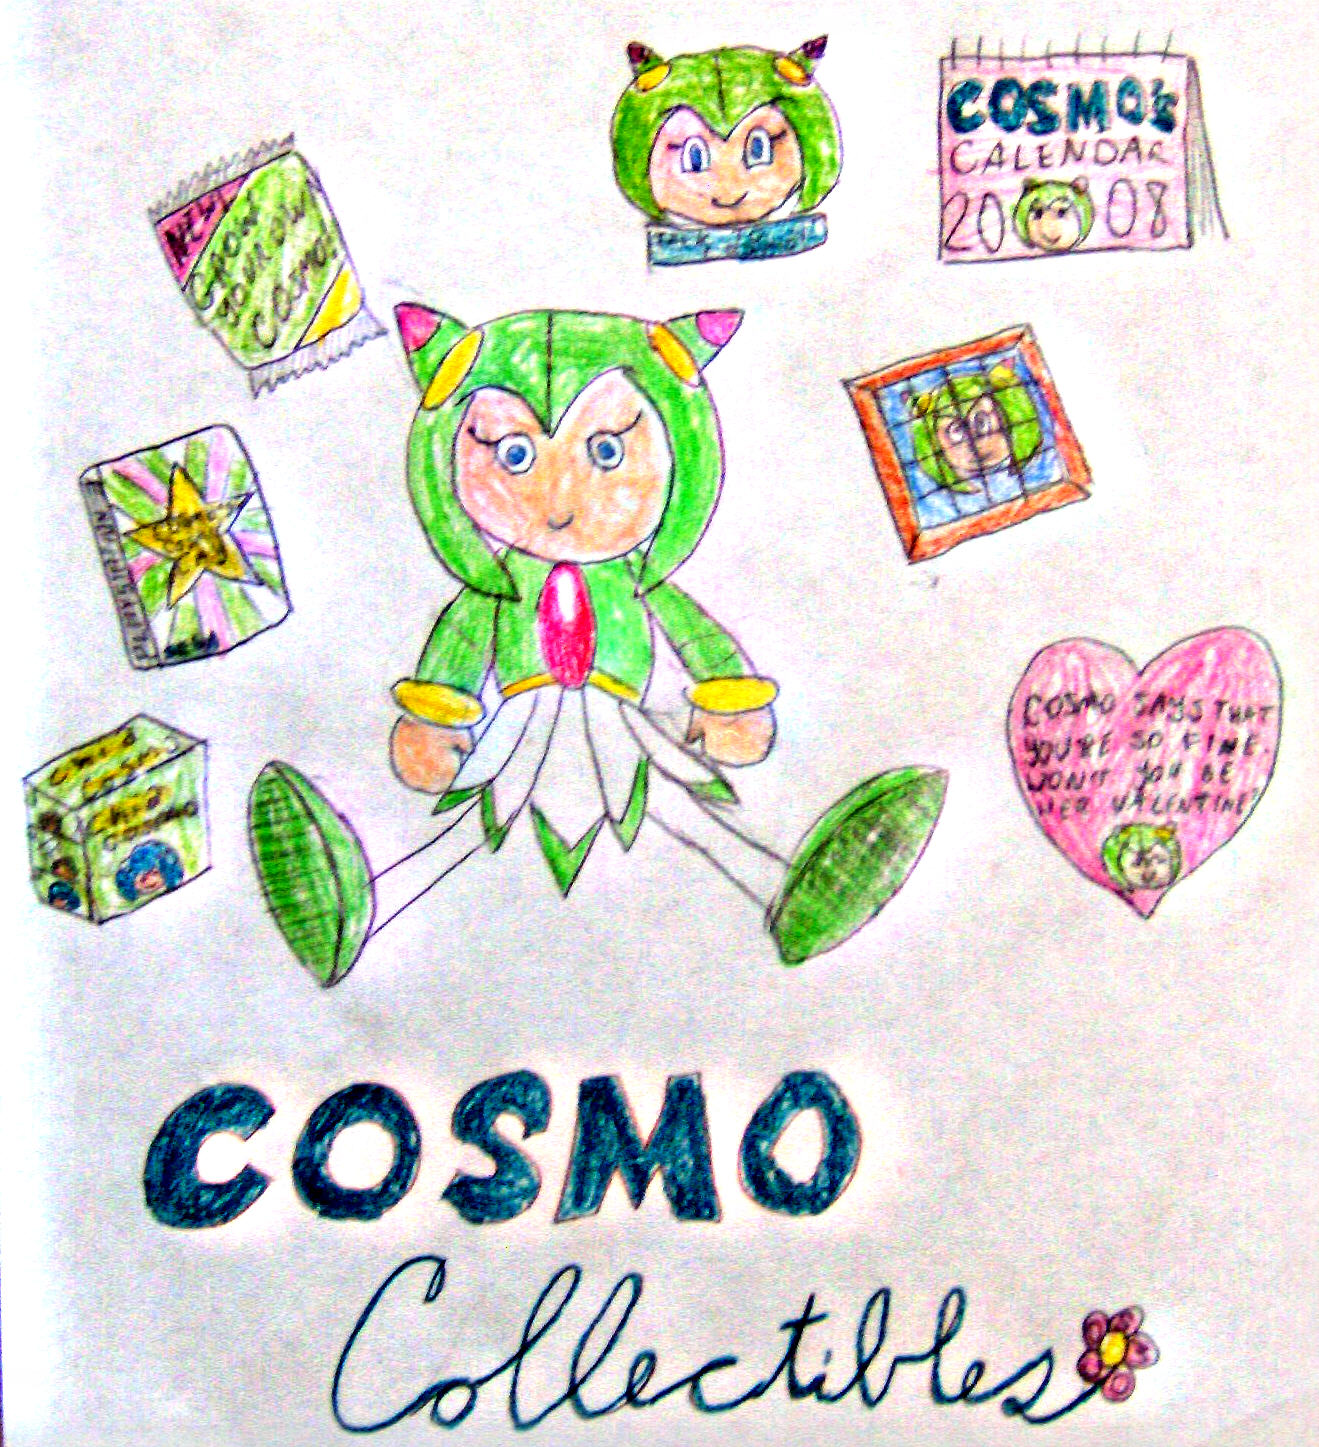 Cosmo Collectibles by germanname